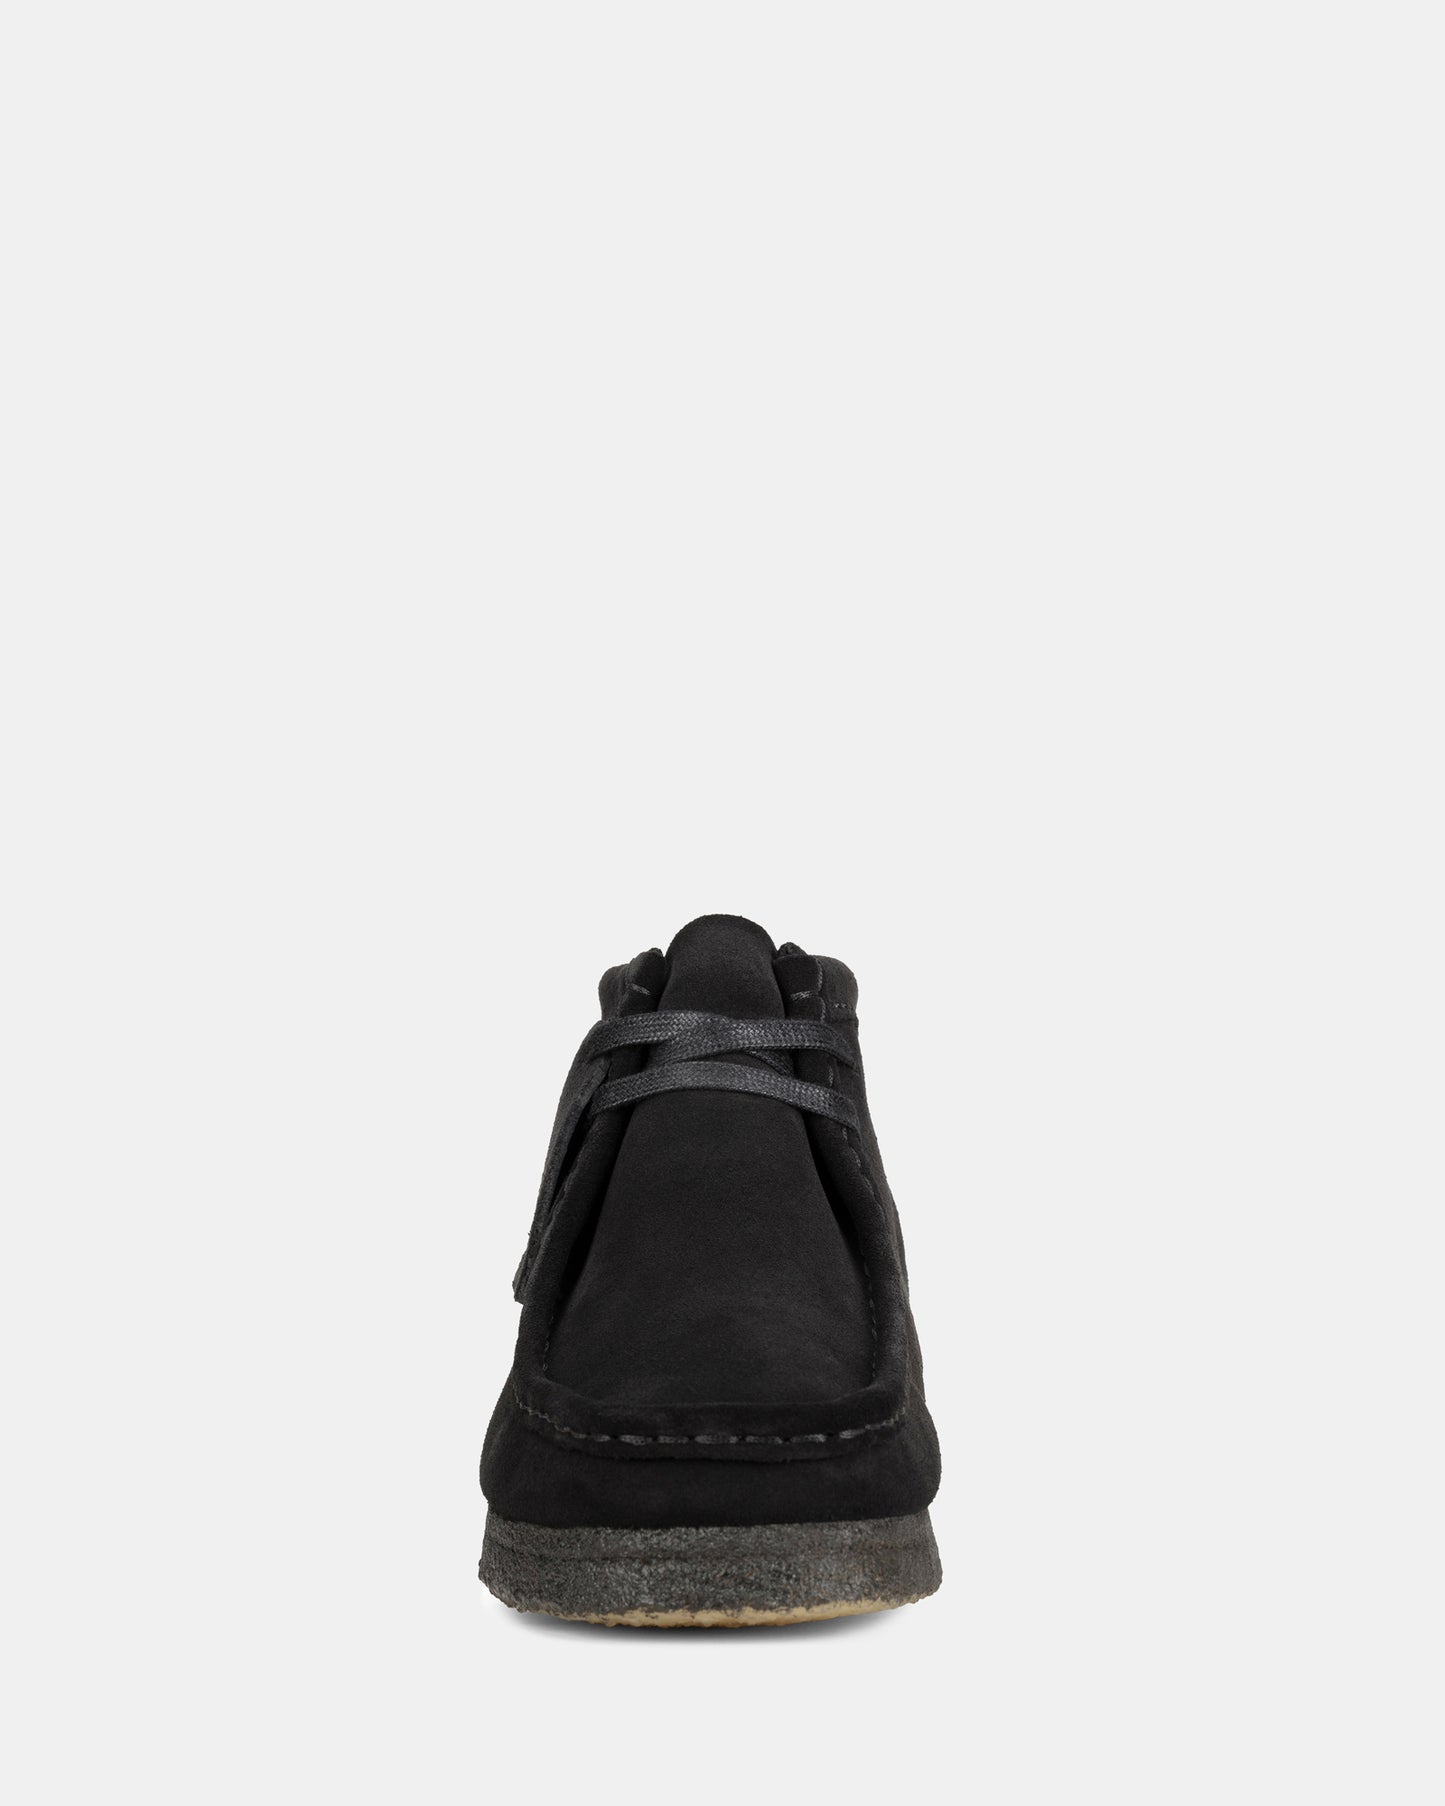 Wallabee Boot. (W) Black Suede